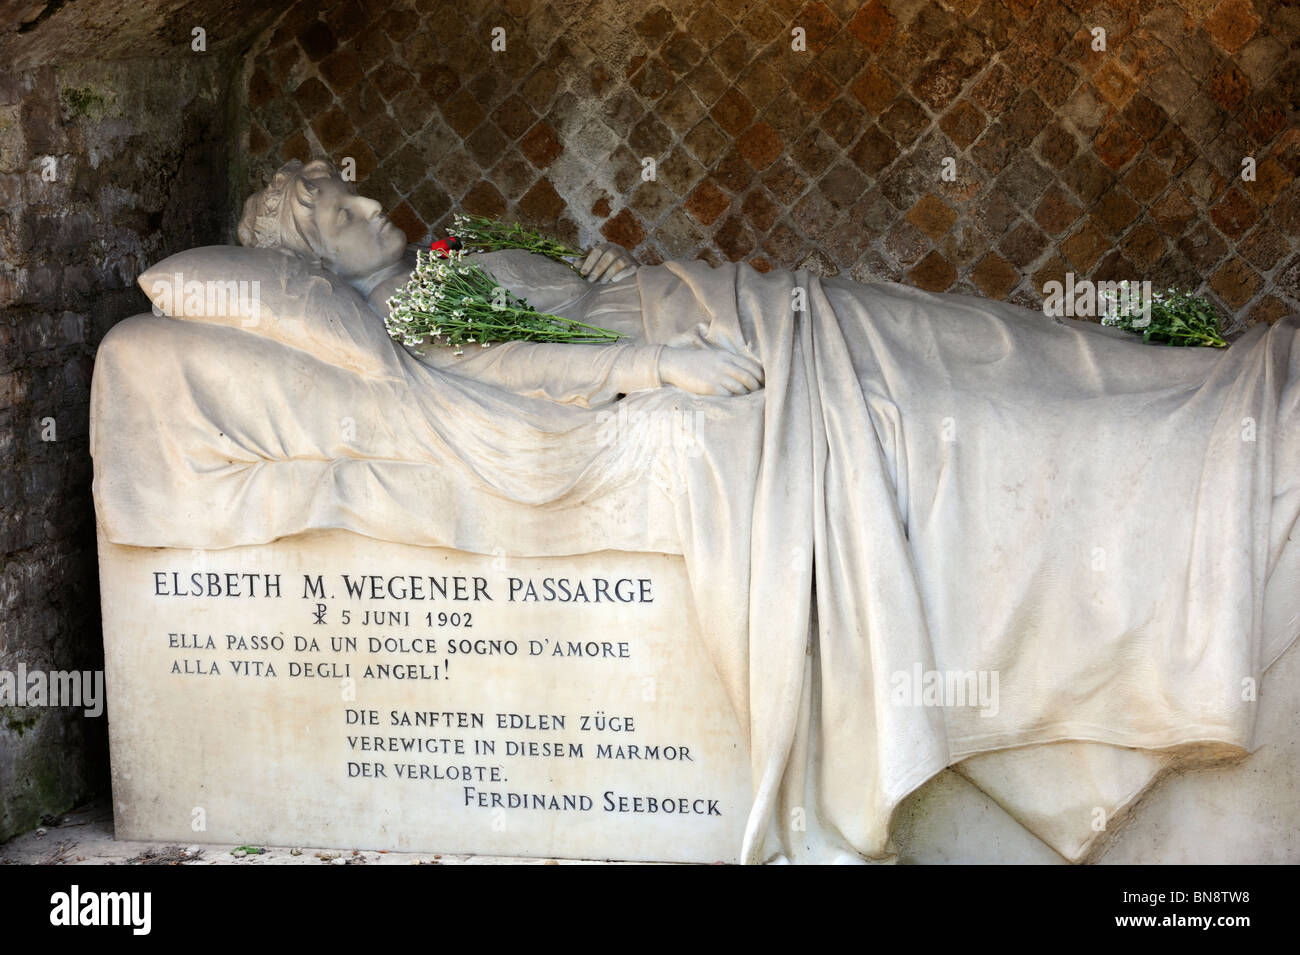 'The Bride' a monument to Elisabeth M Wegener Passarge died 1902 in the English Cemetery in Rome Stock Photo